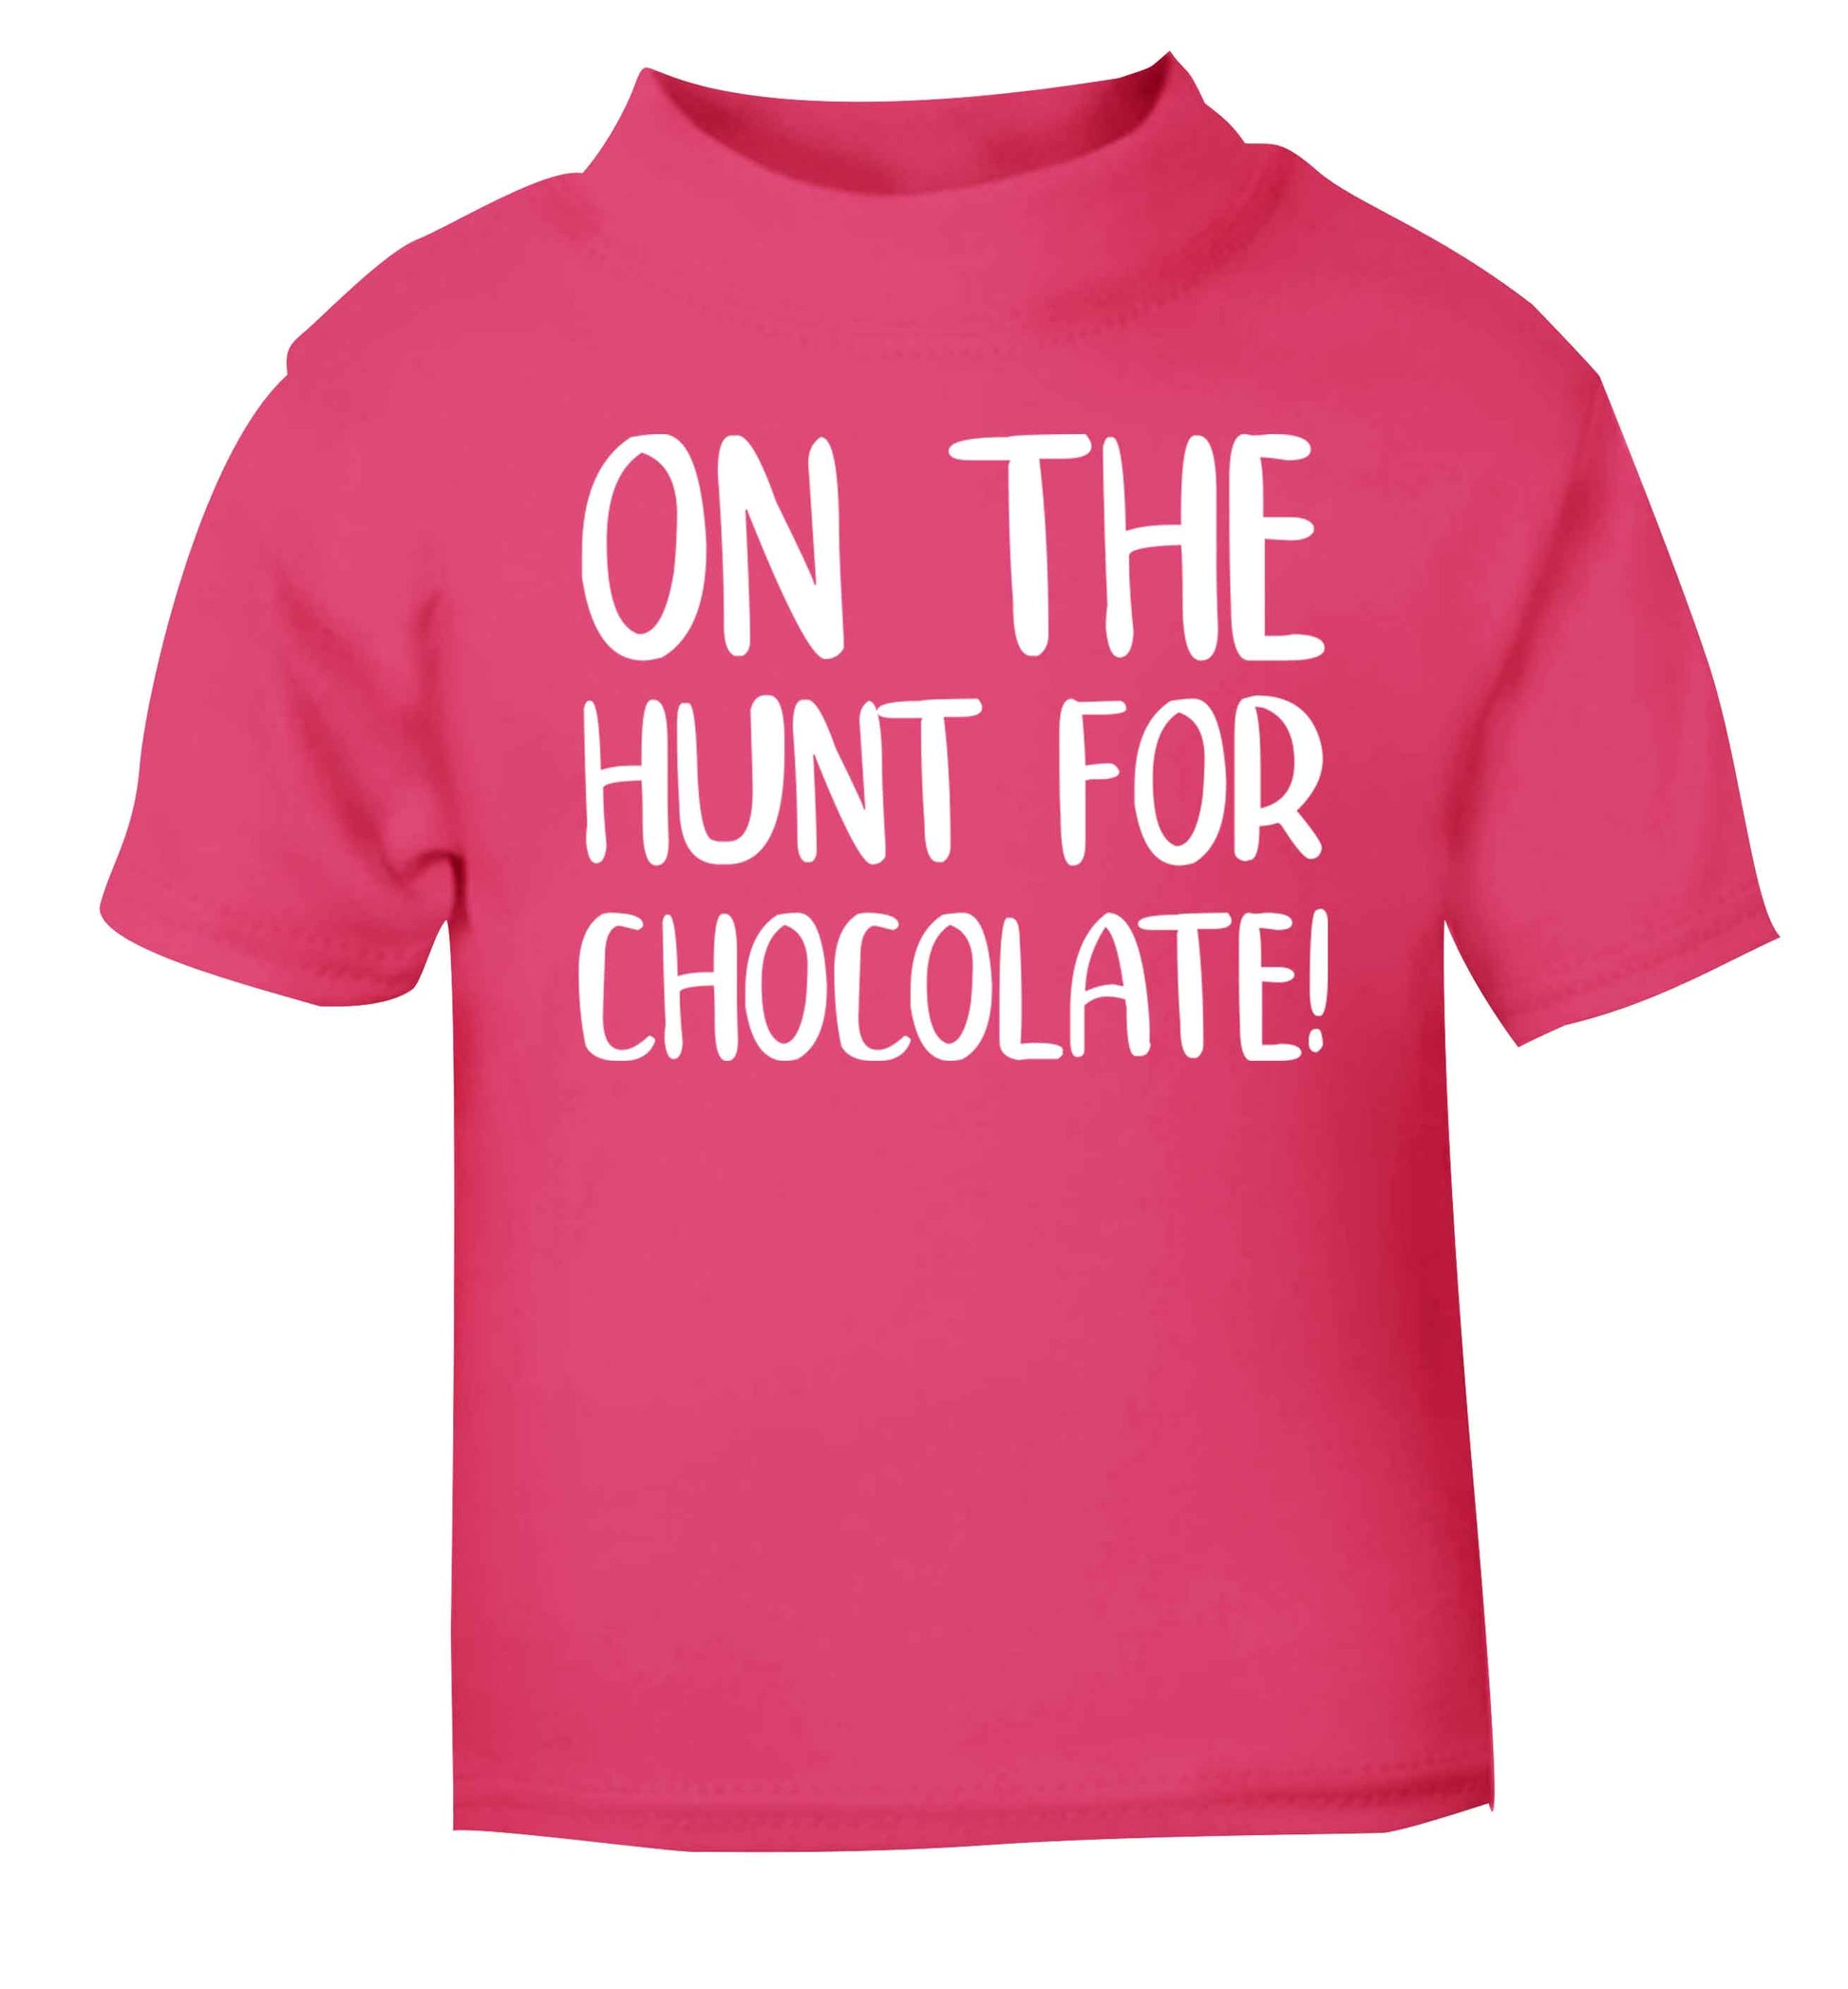 On the hunt for chocolate! pink baby toddler Tshirt 2 Years